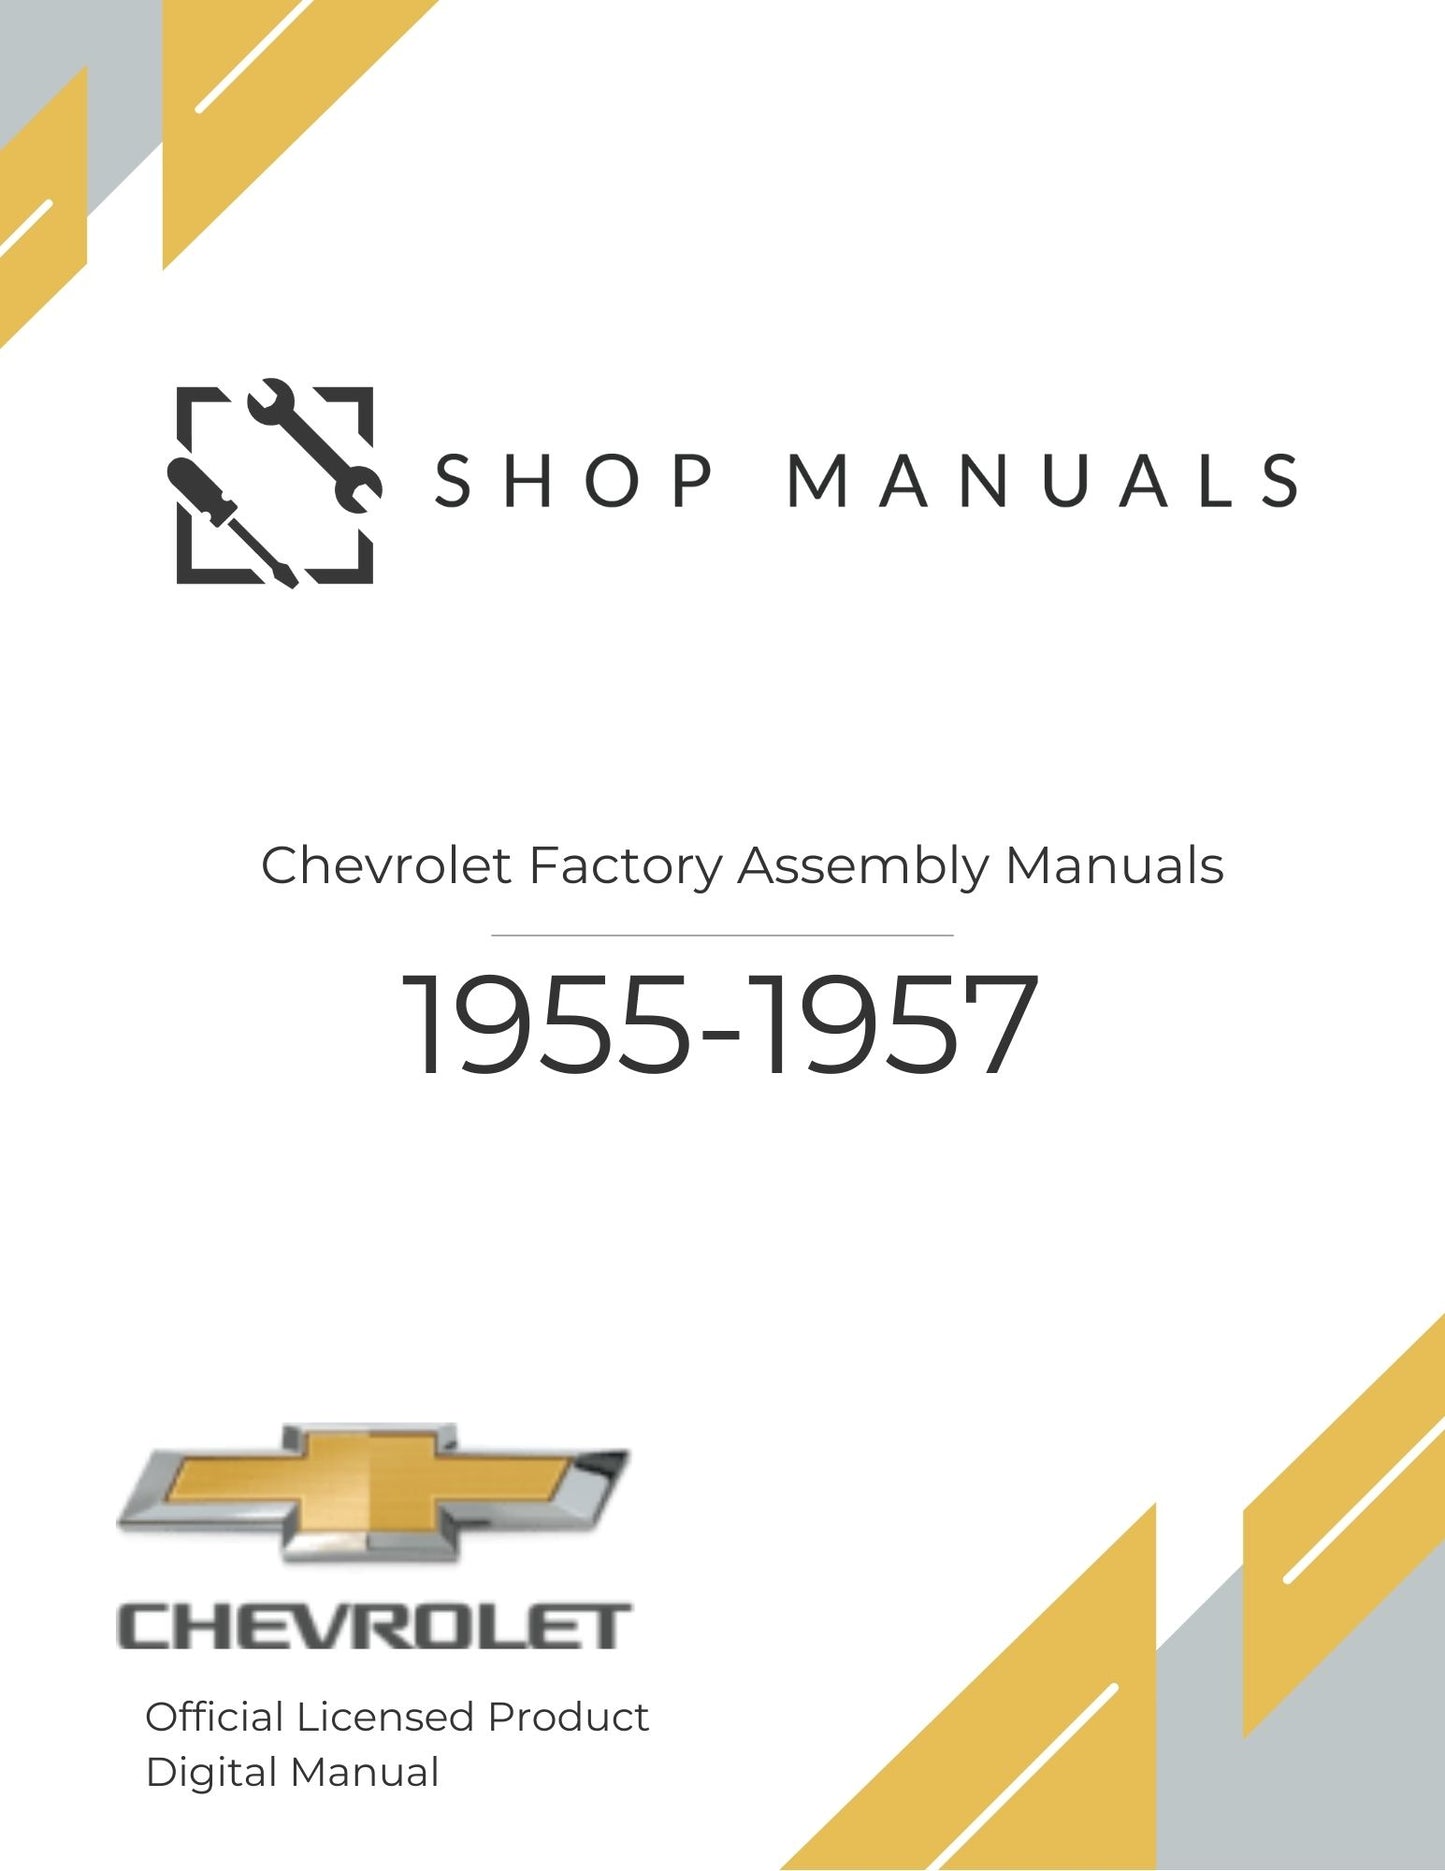 1955-1957 Chevrolet Factory Assembly Manuals